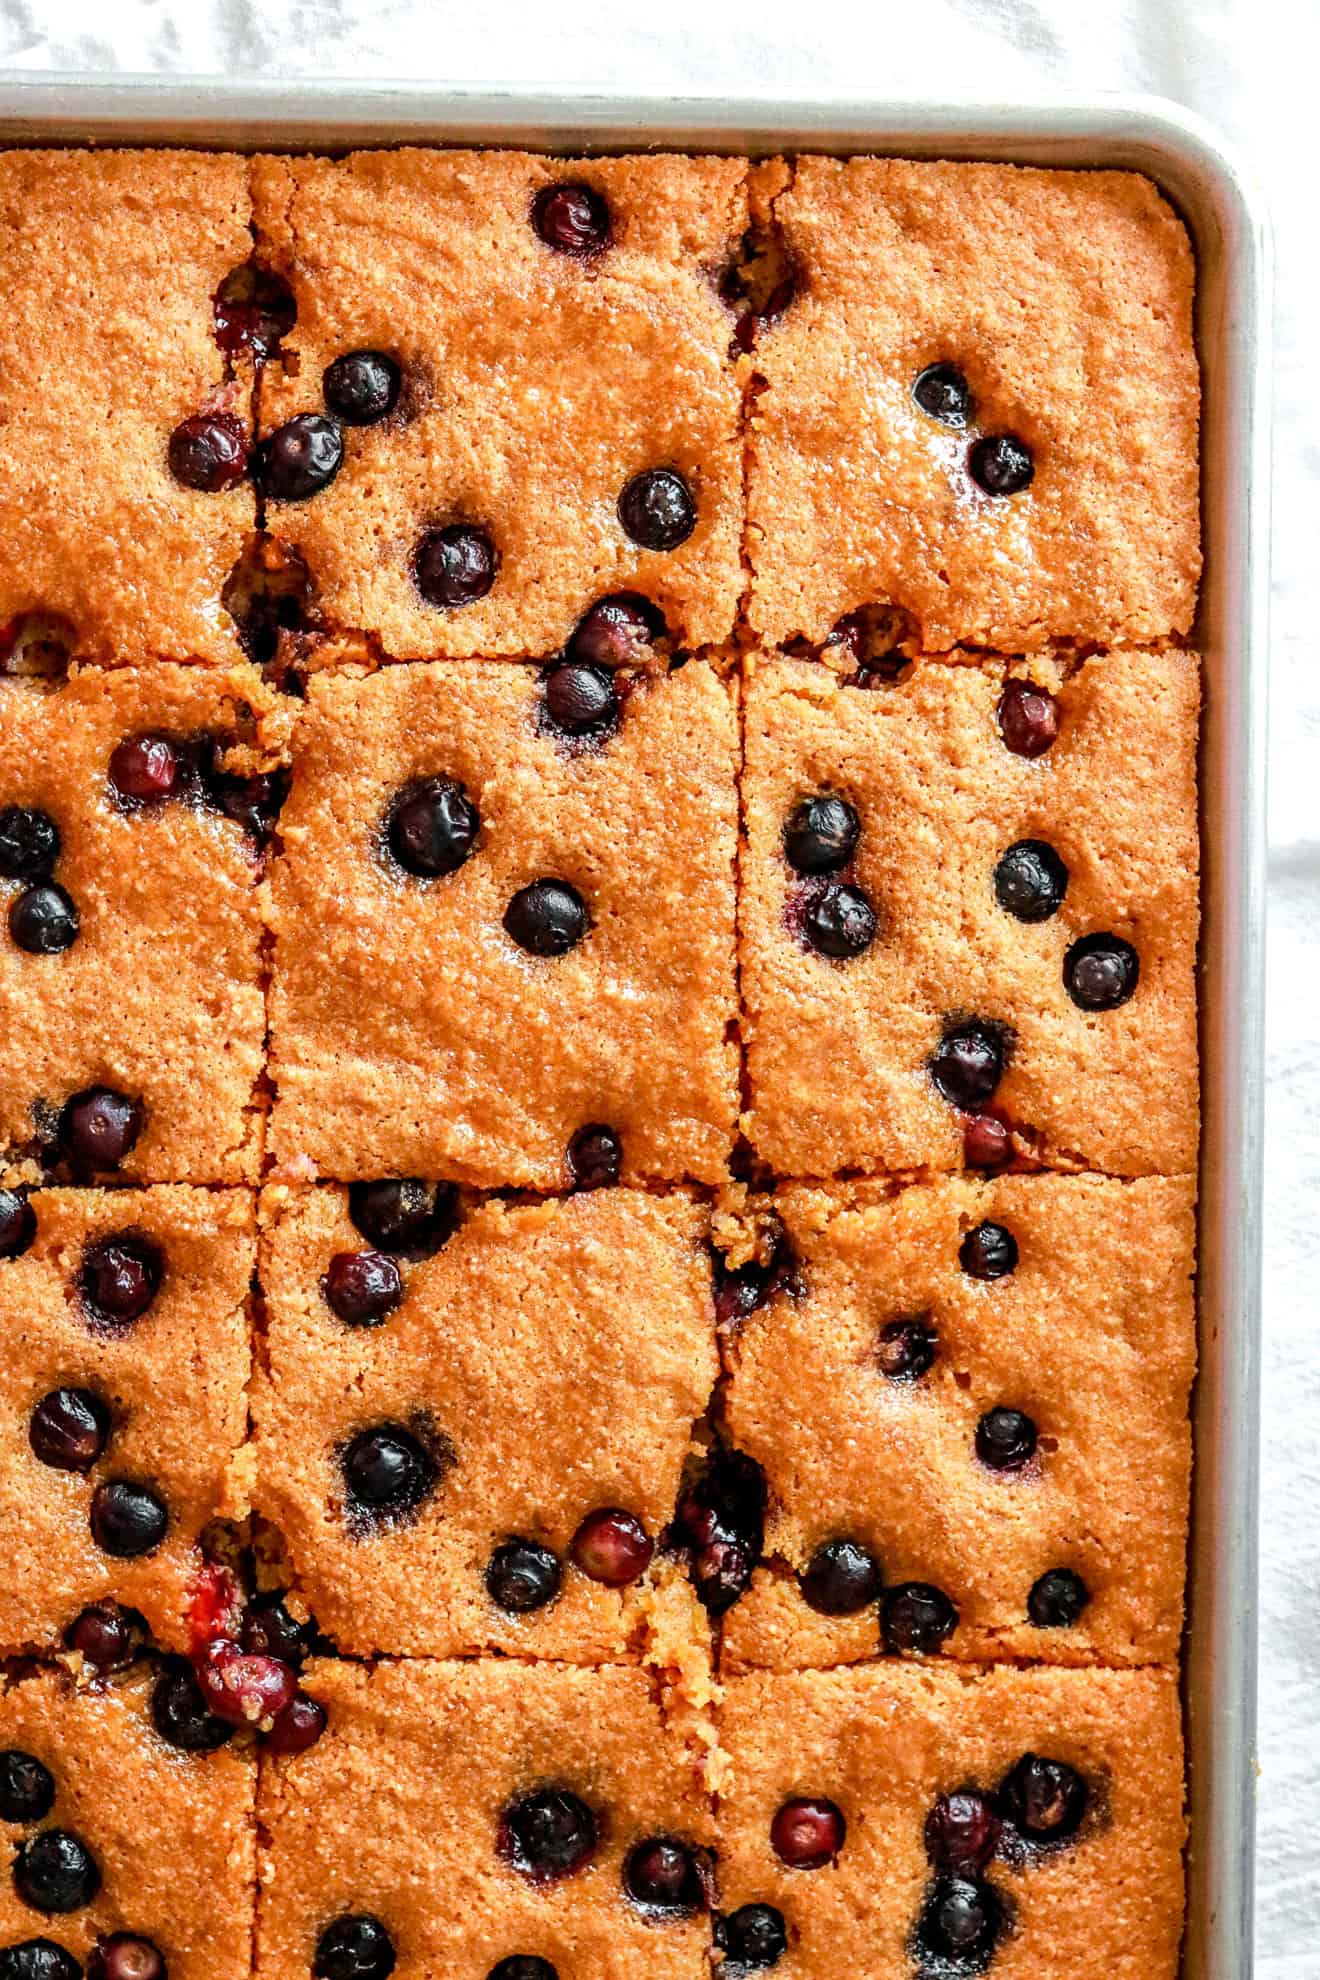 This is an overhead vertical image of a sheet pan with blueberry cake baked. The cake is cut into squares. The sheet pan sits on a light surface. 